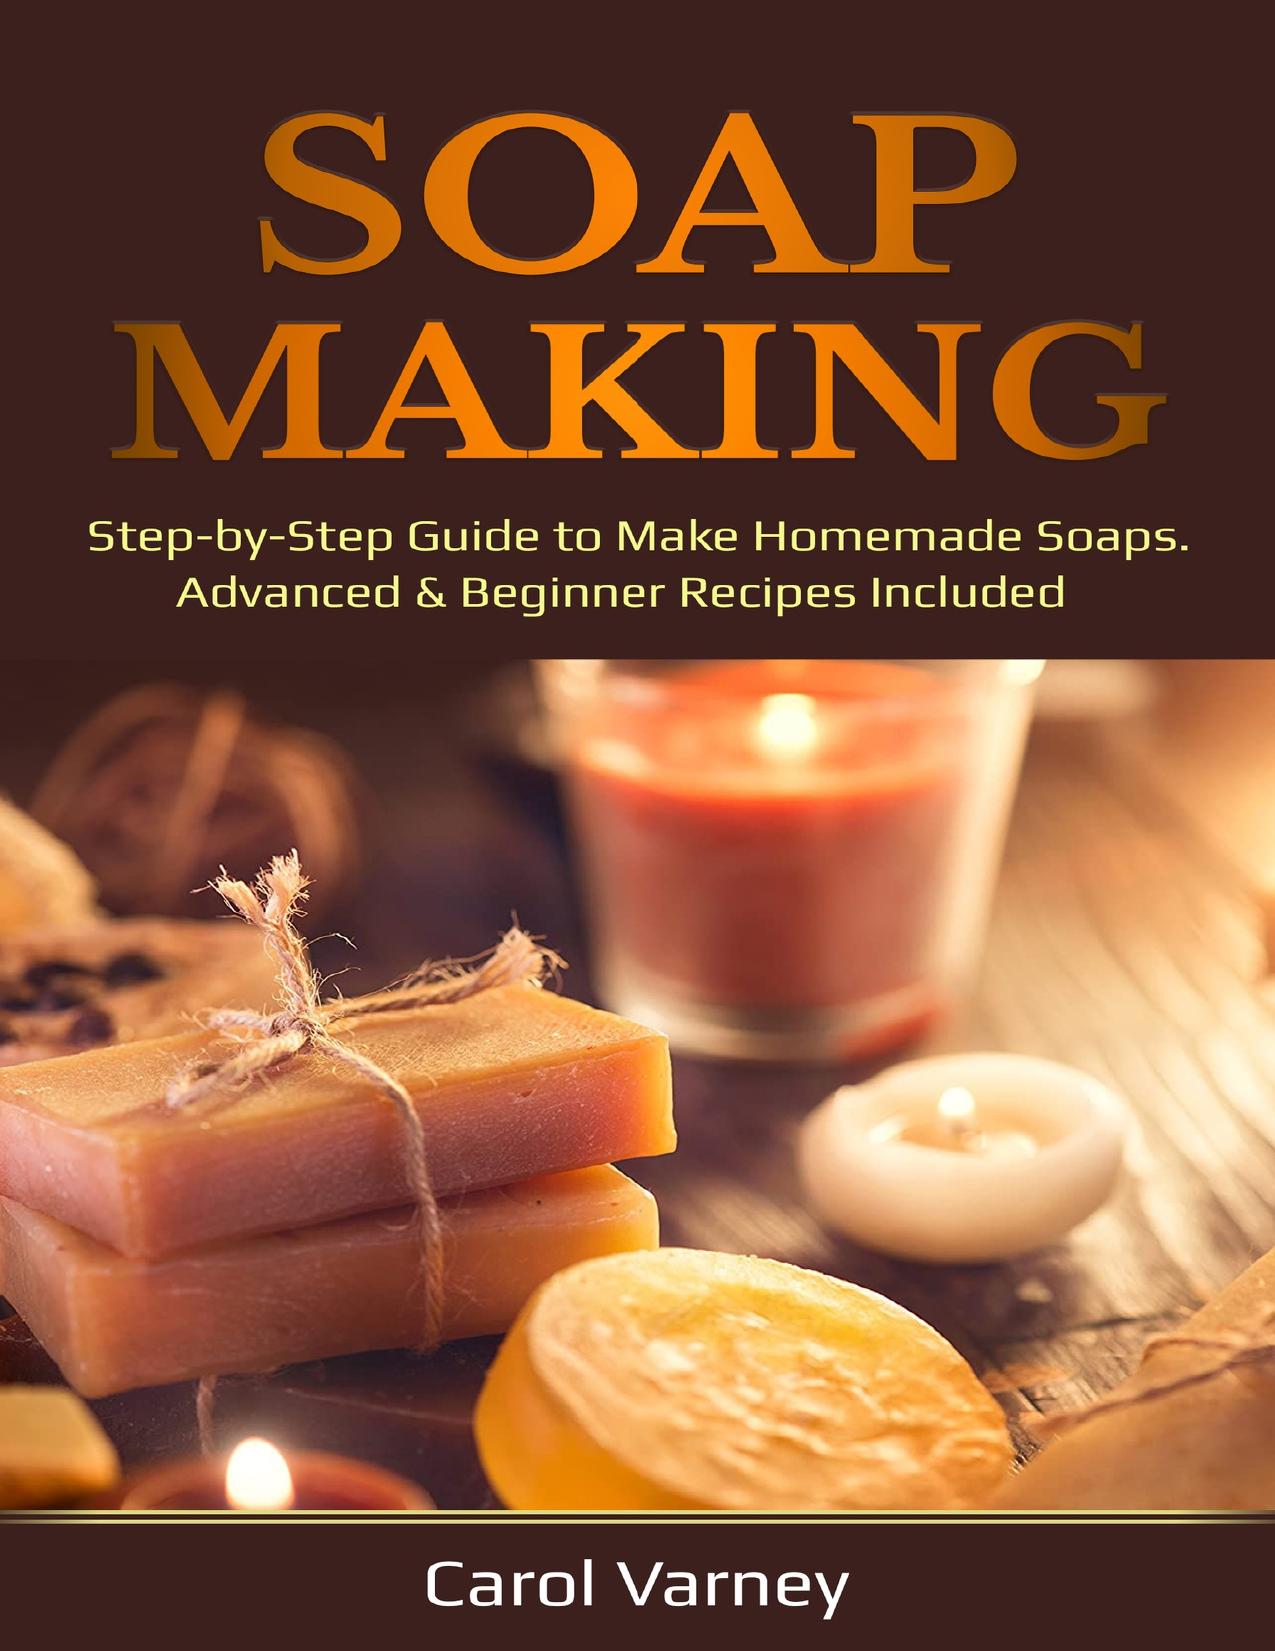 Soap Making: Step-by-Step Guide to Make Homemade Soaps. Advanced & Beginner Recipes Included by Varney Carol